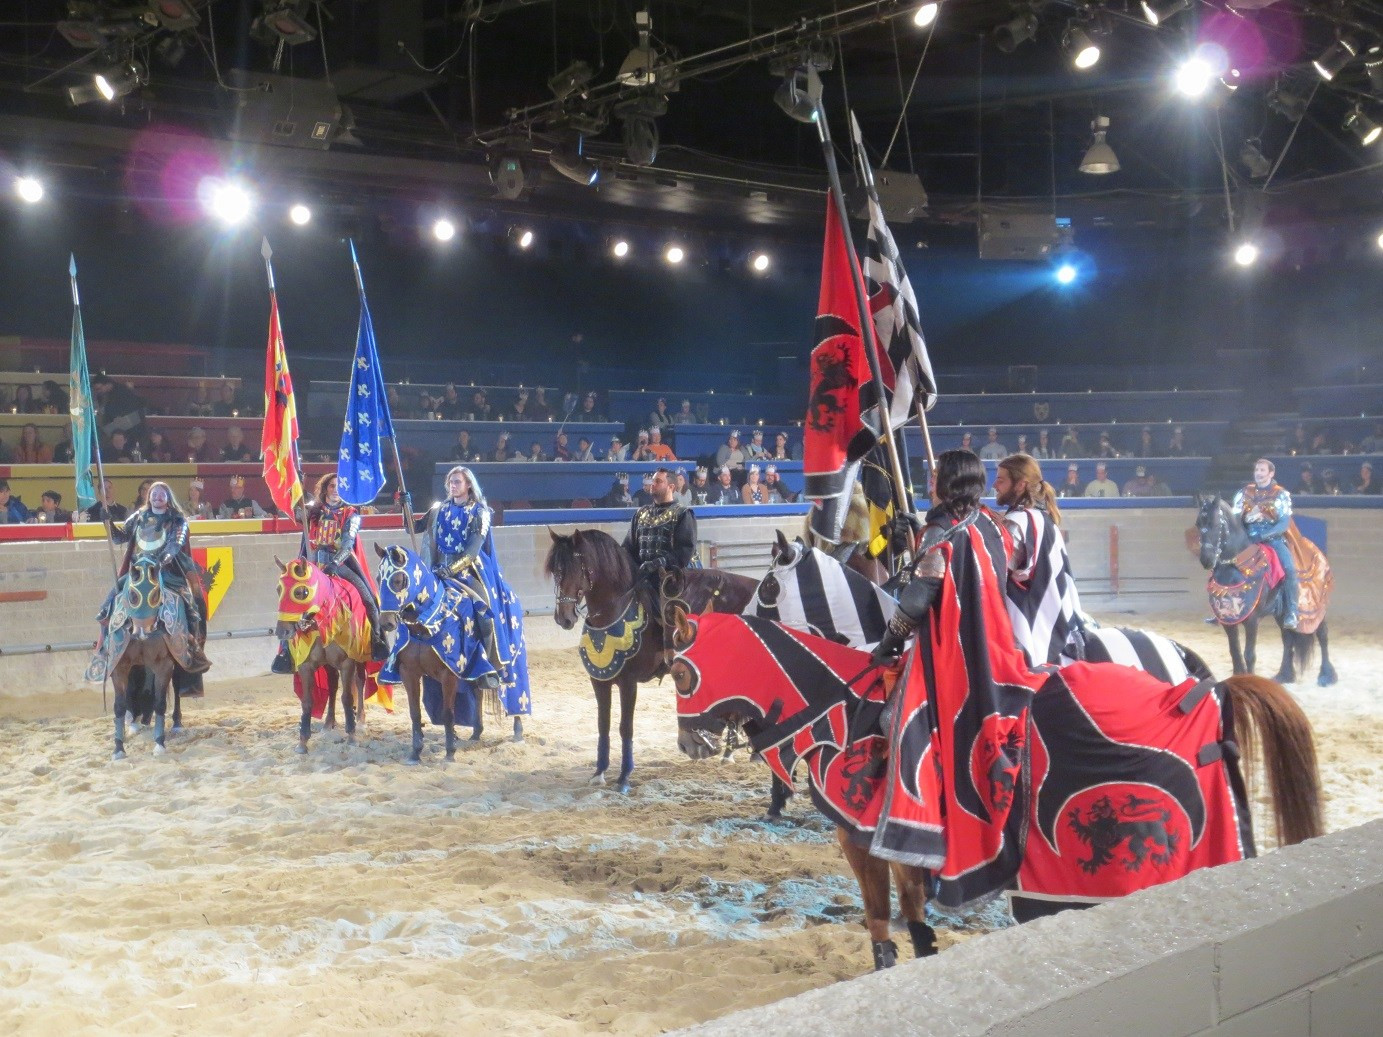 Medieval Times Dinner And Tournament
 Me val Times Dinner & Tournament